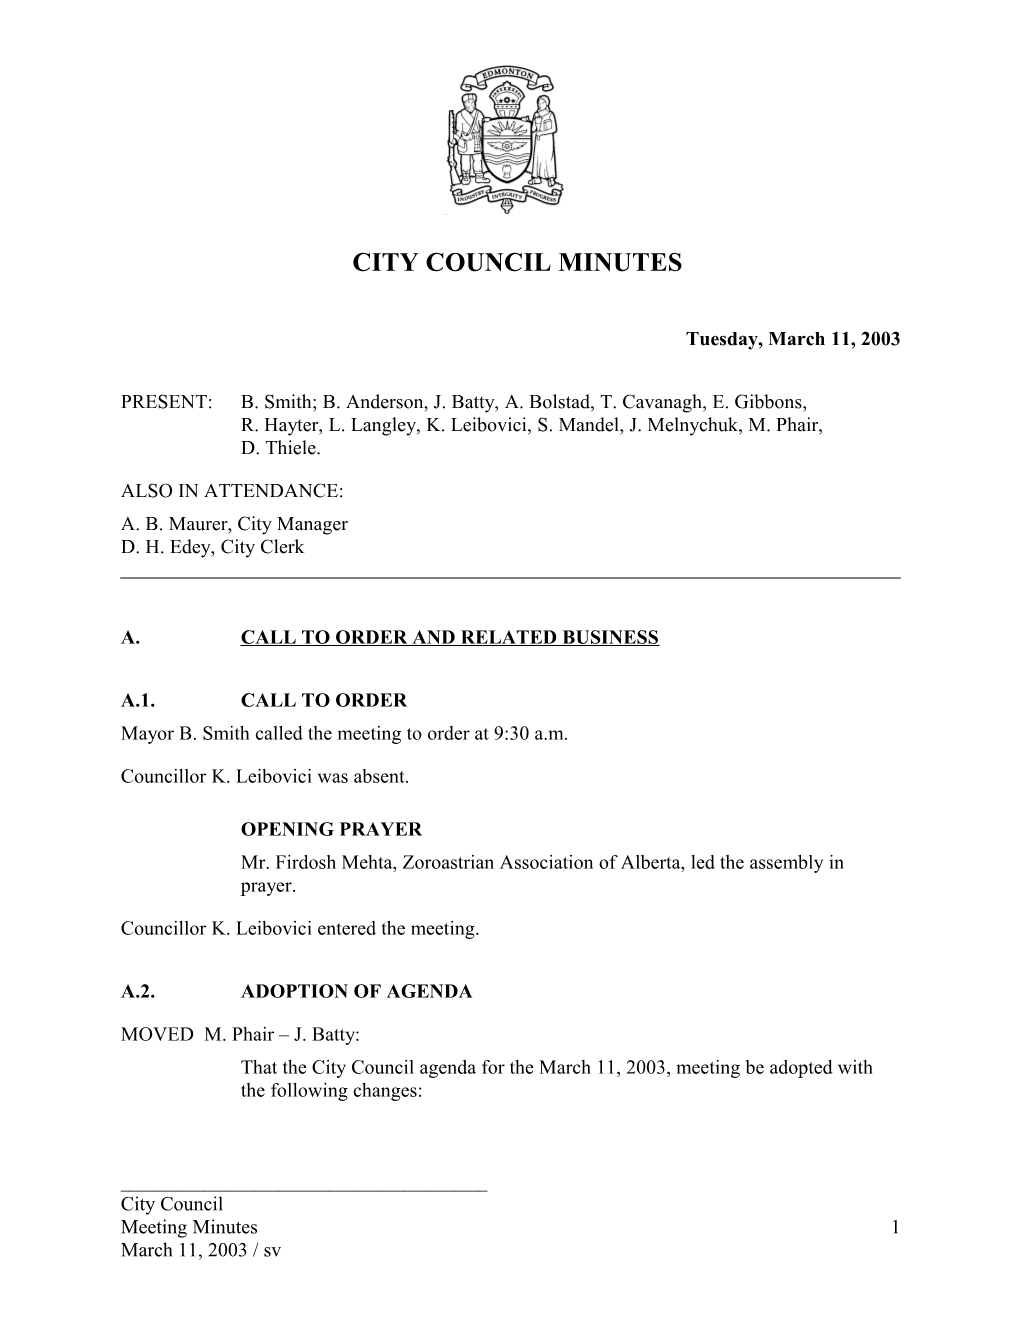 Minutes for City Council March 11, 2003 Meeting